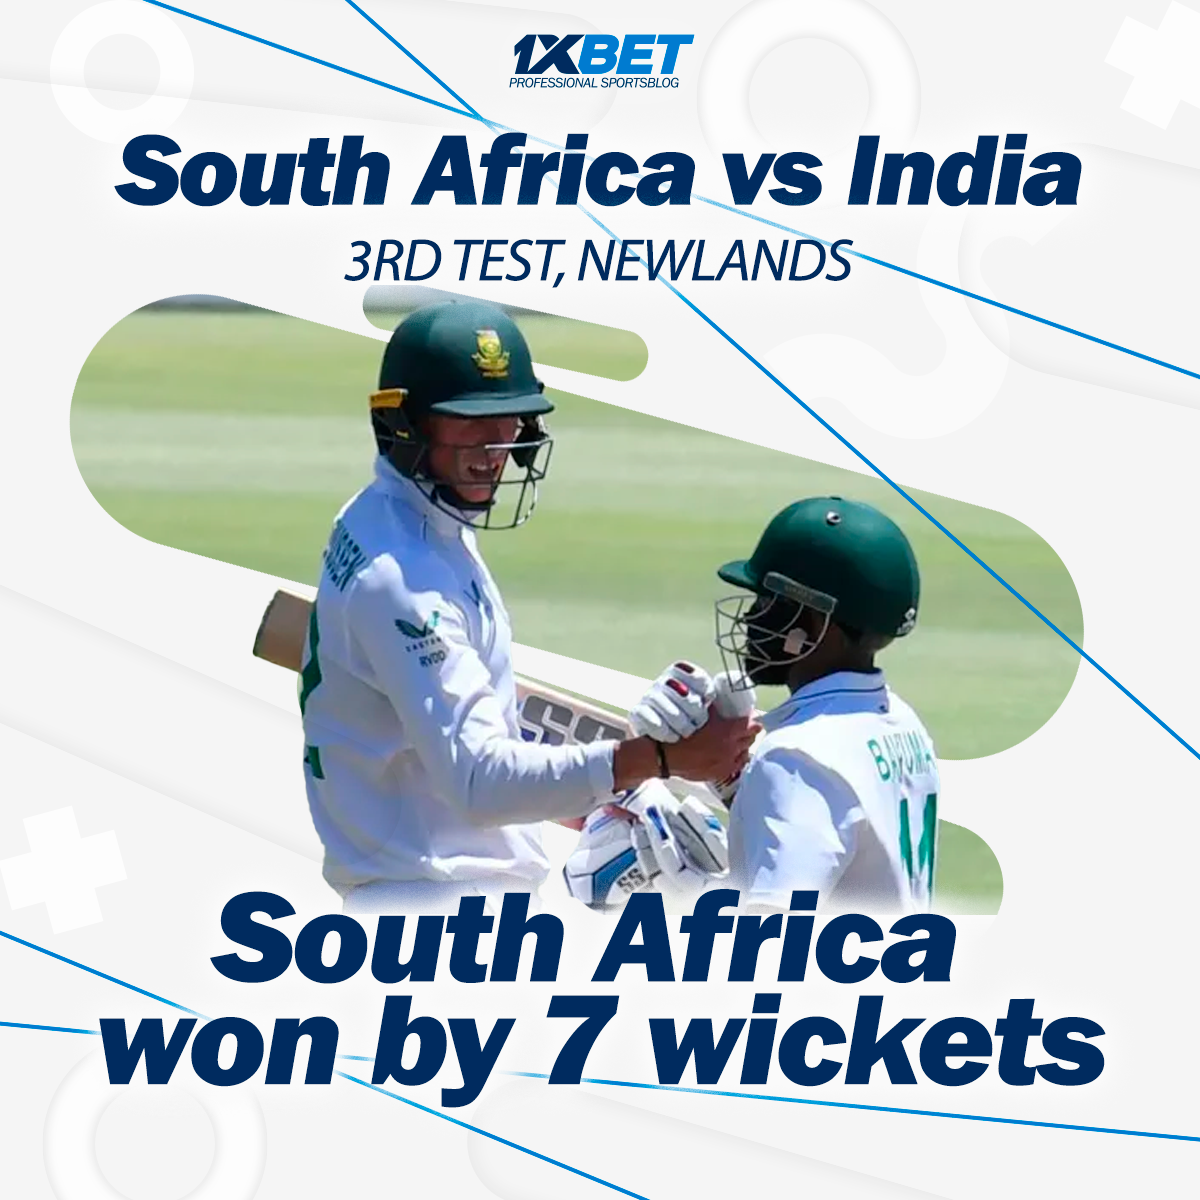 3RD TEST, South Africa vs India: SA won by 7 wickets